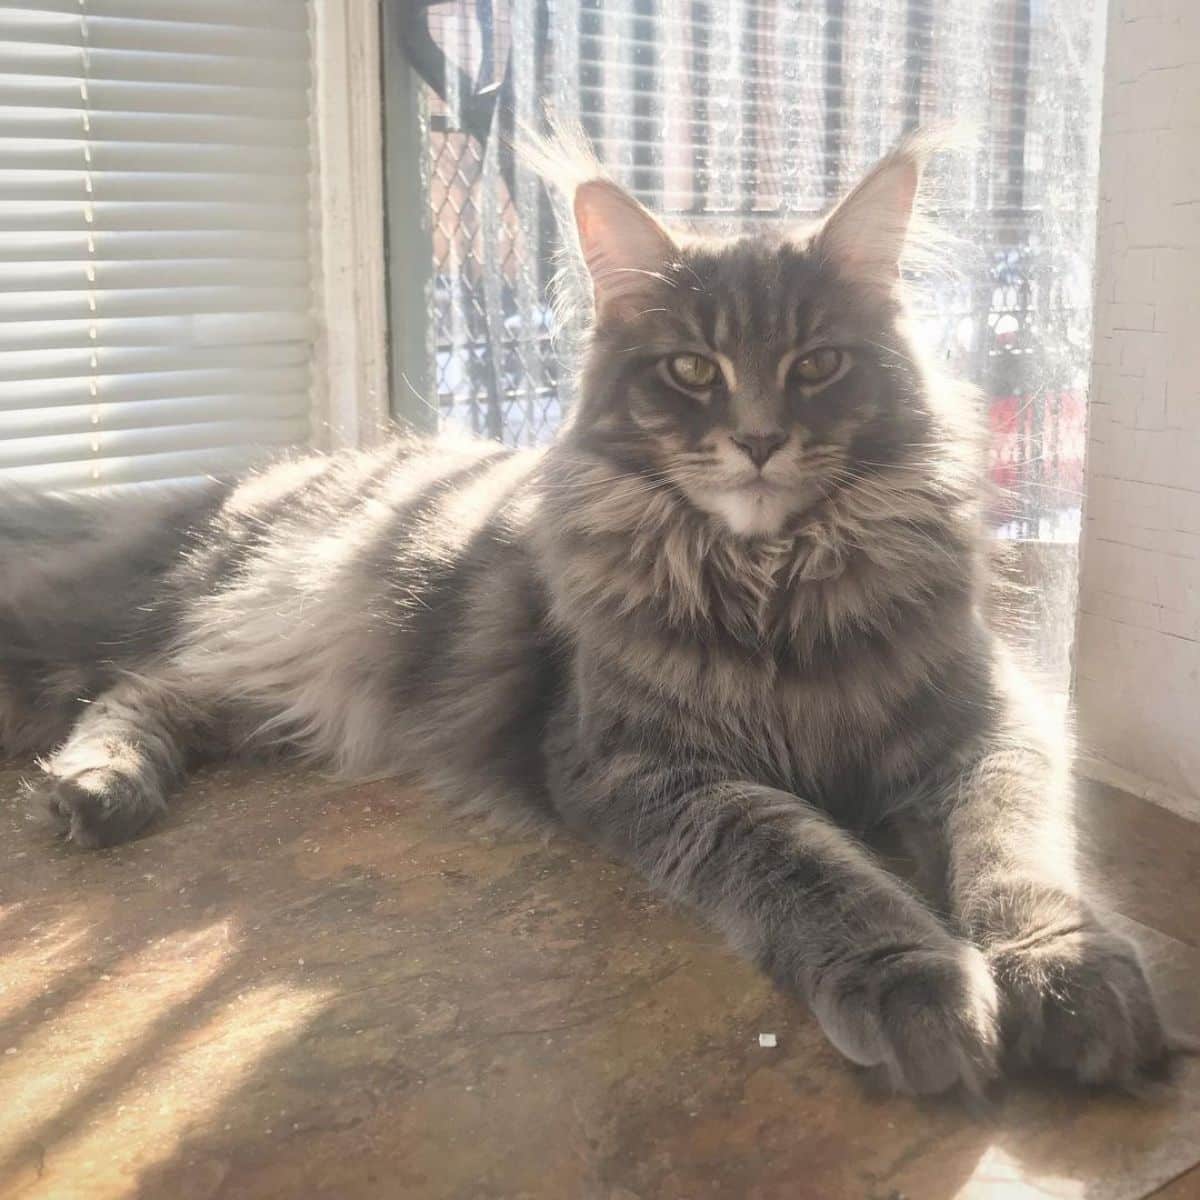 A beautiful tabby maine coon lying on a floor in the sunshine.